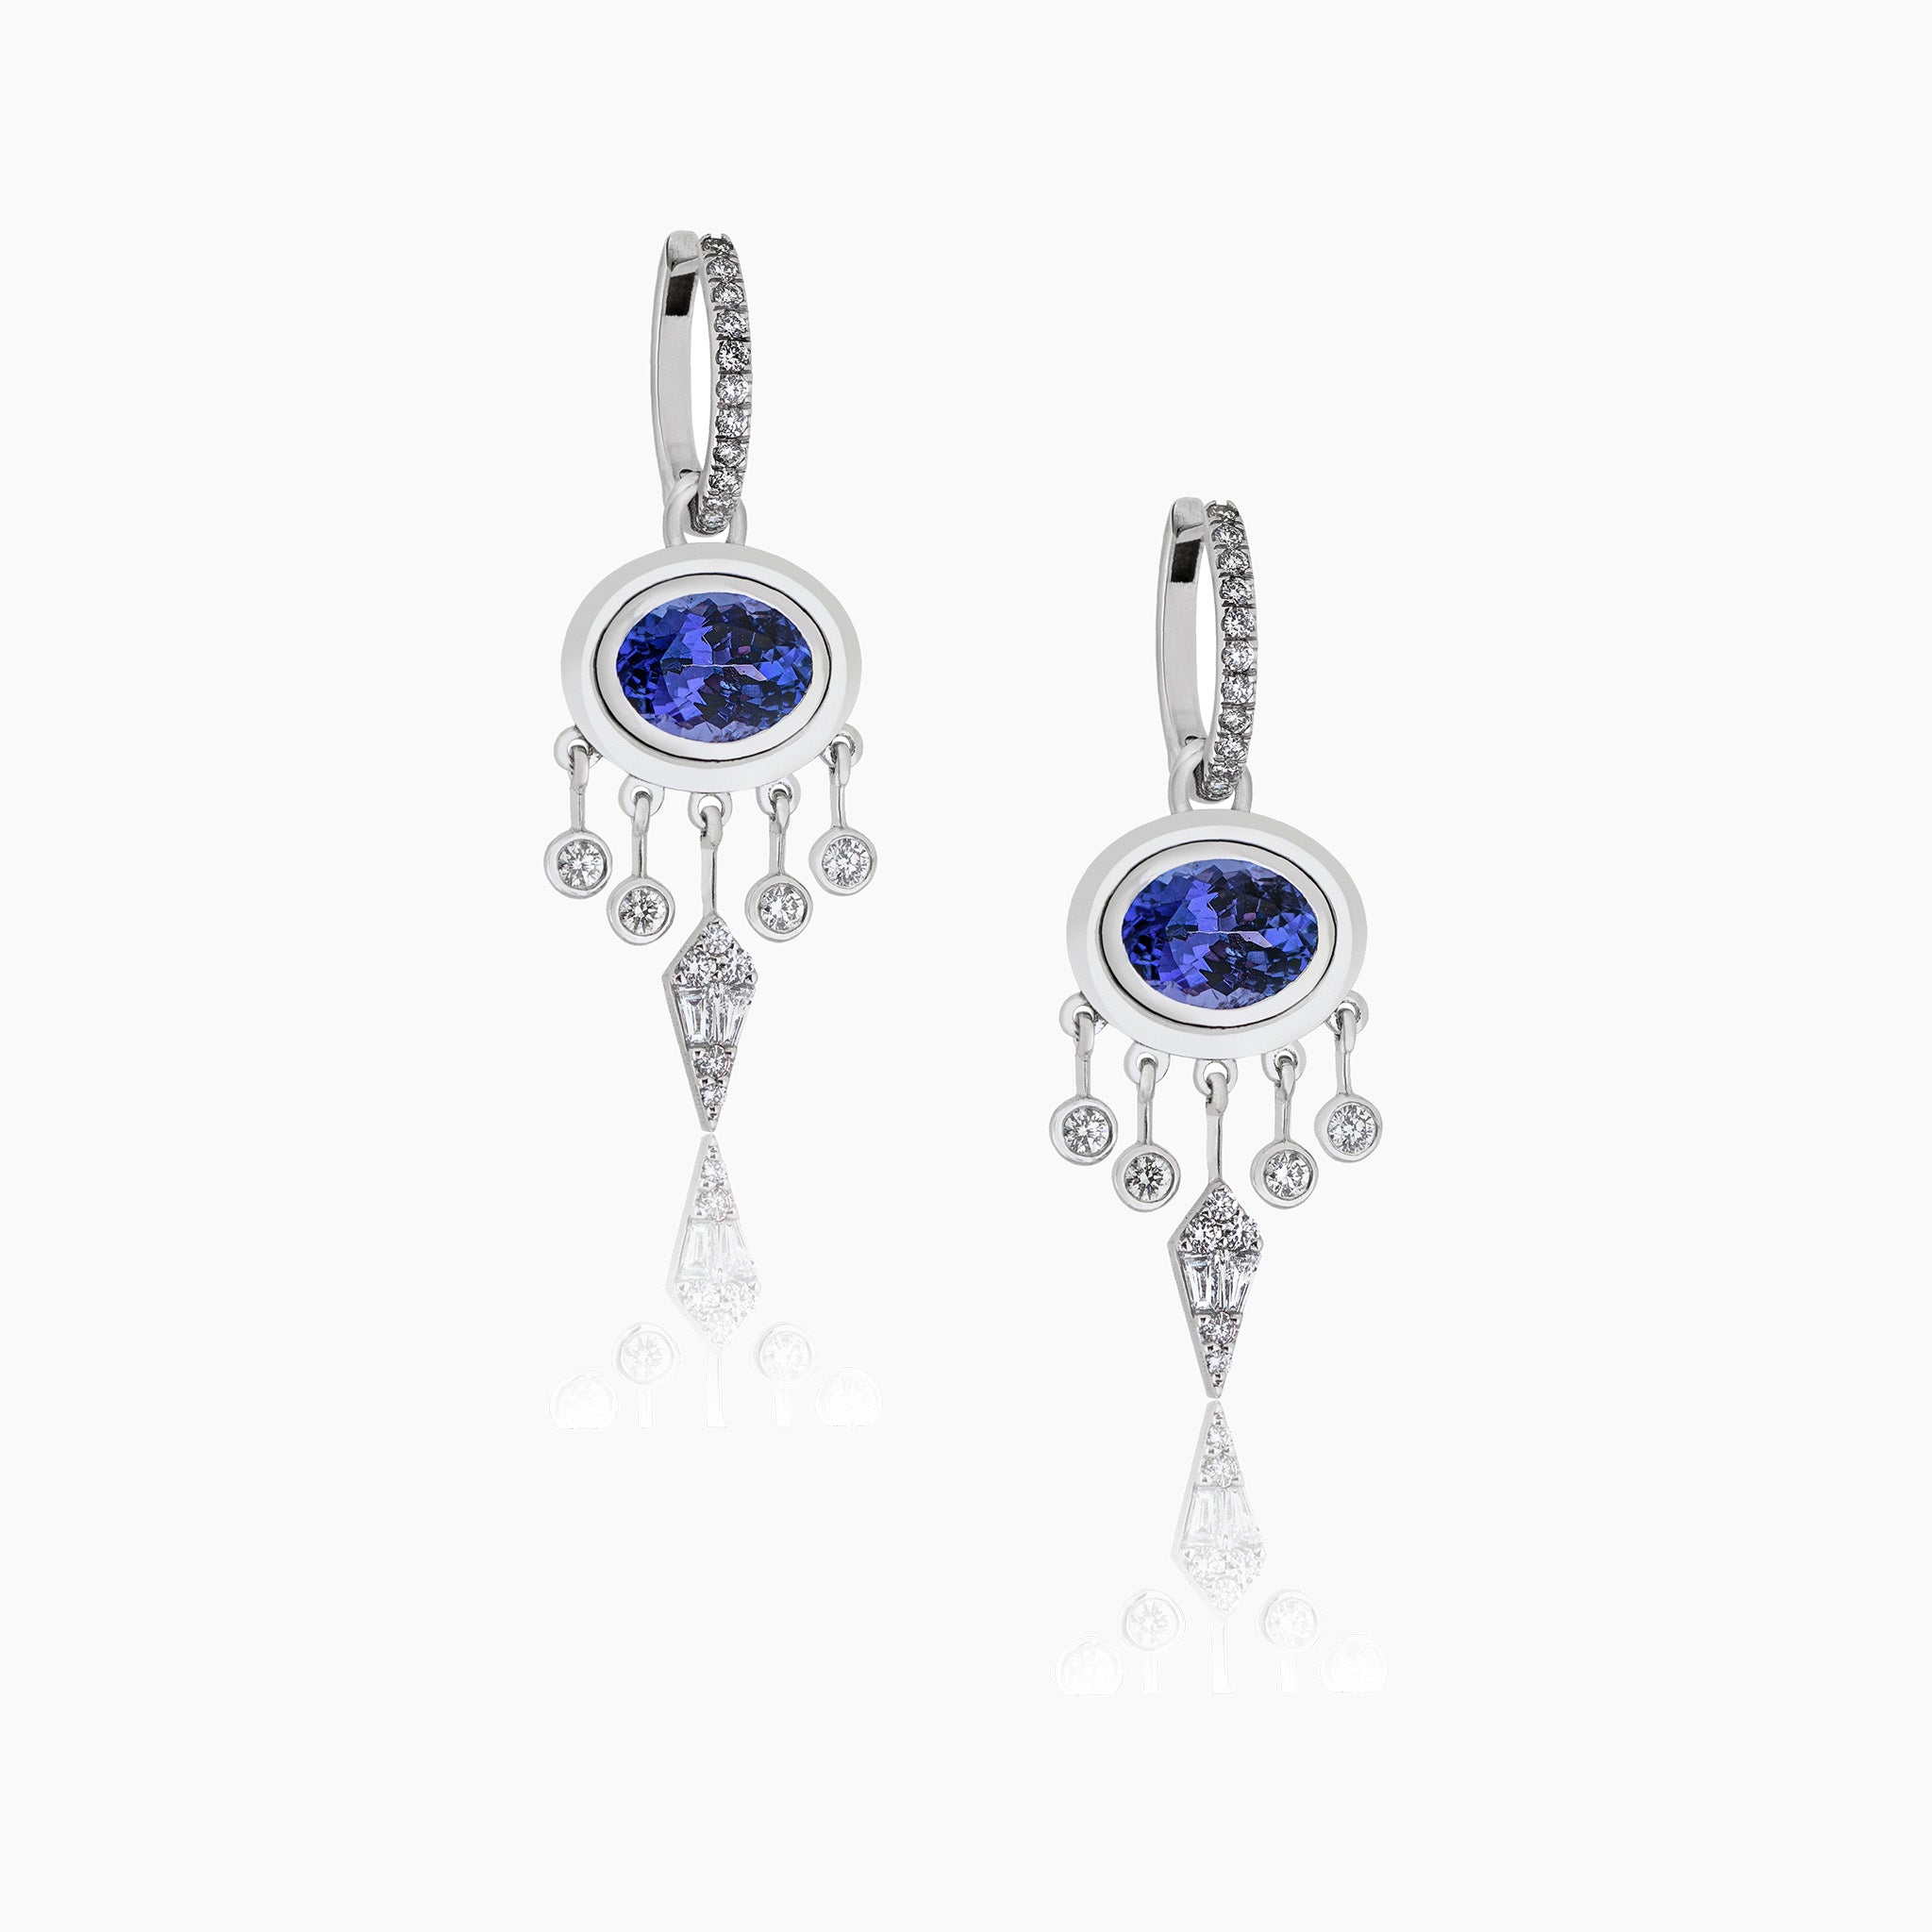 Gypset Earrings: Diamond and Tanzanite Jewellery Set on an Off-White Background